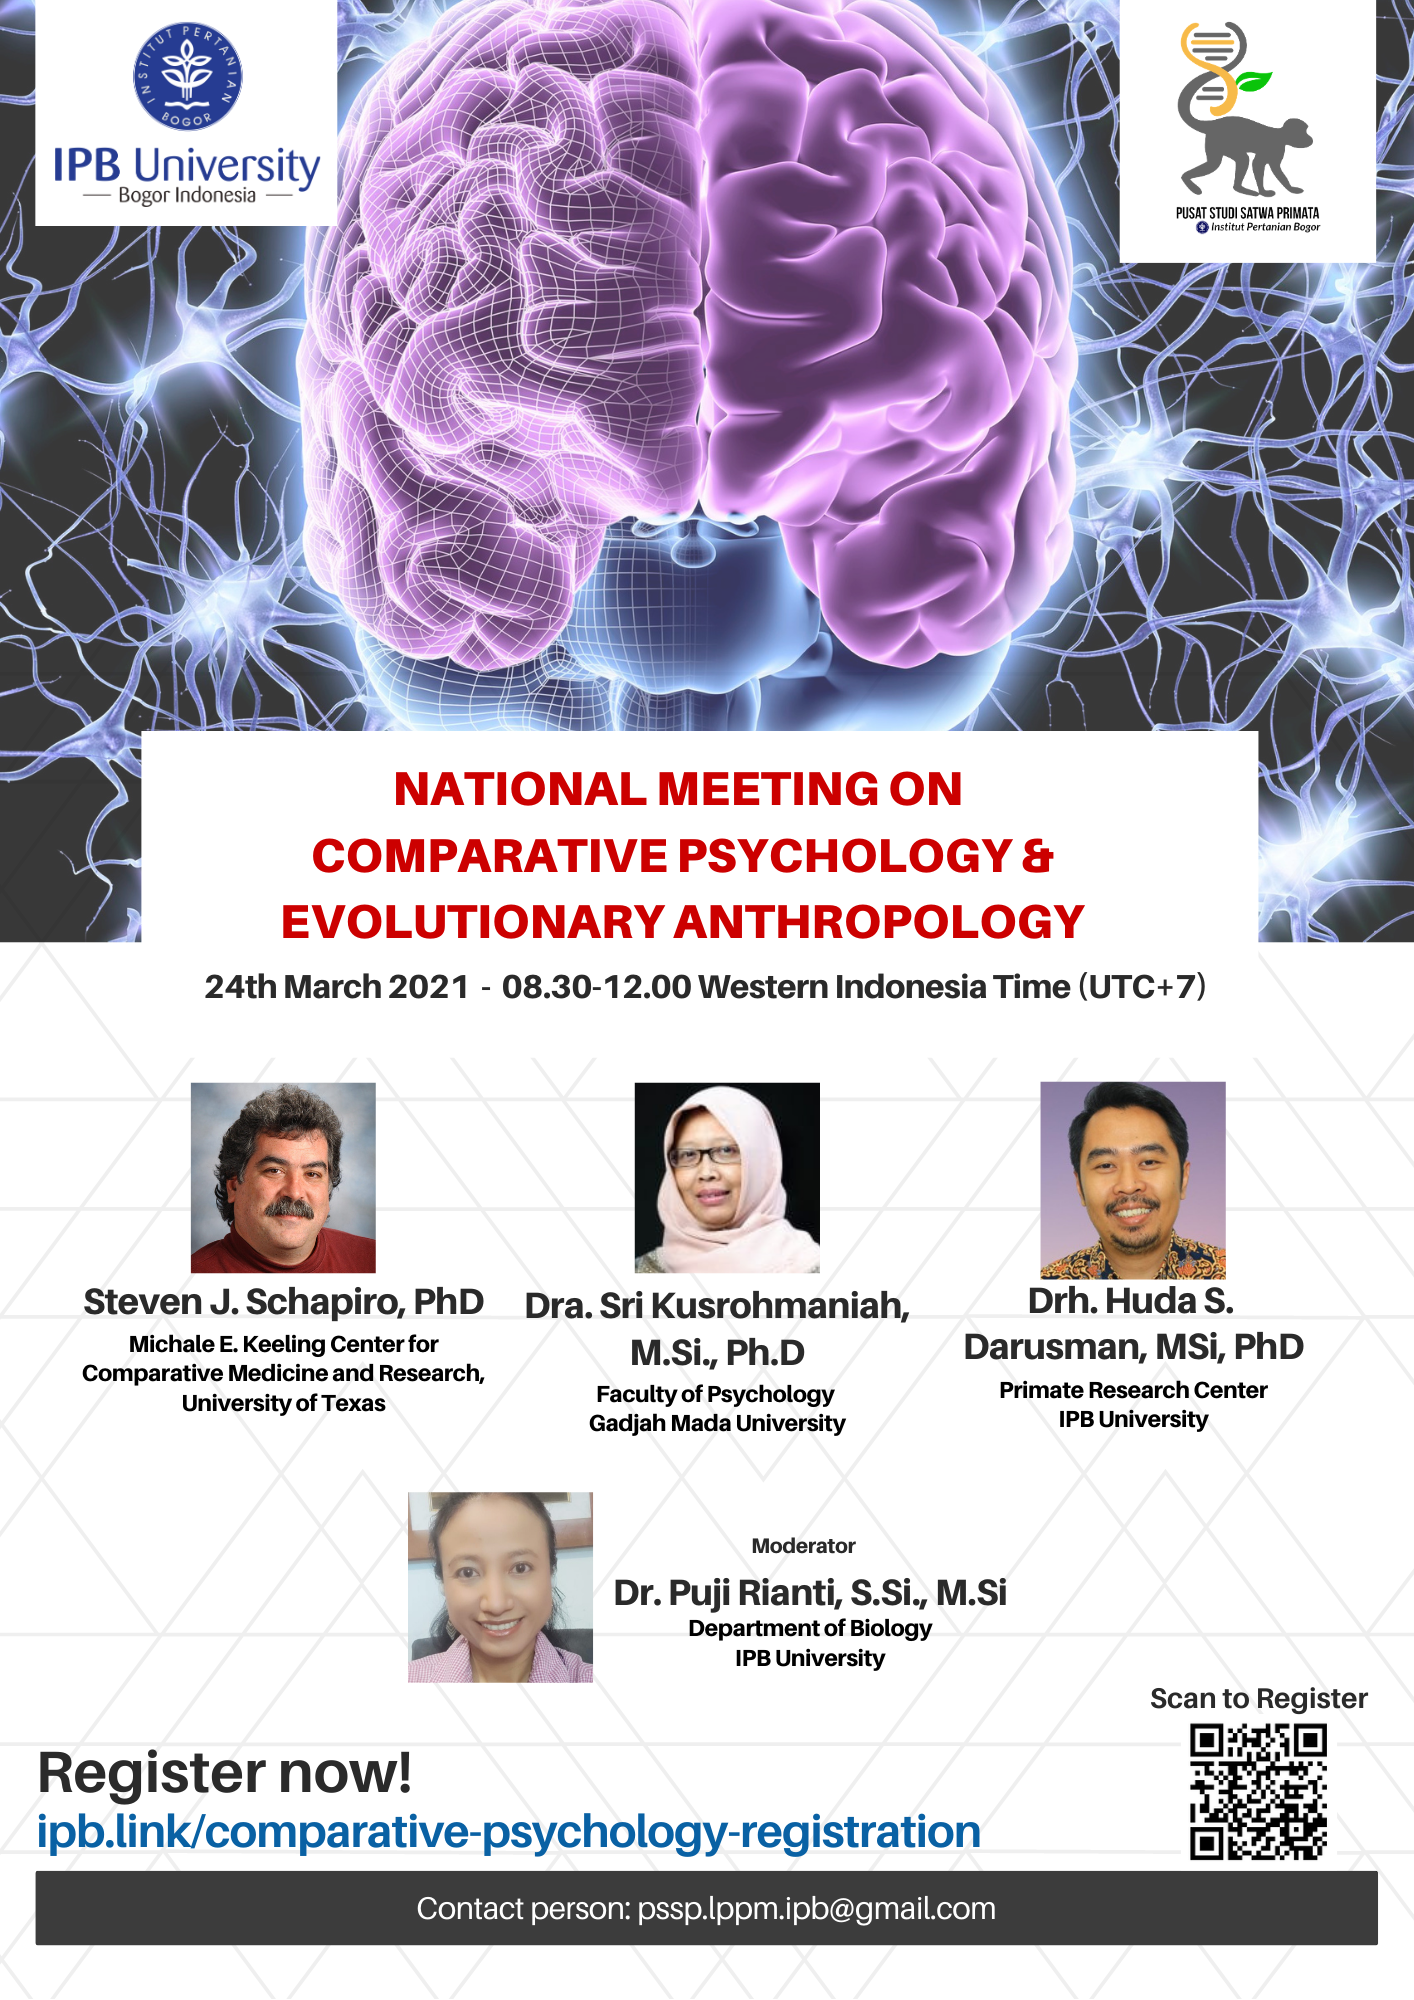 National Meeting on Comparative Psychology and Evolutionary Anthropology Registration